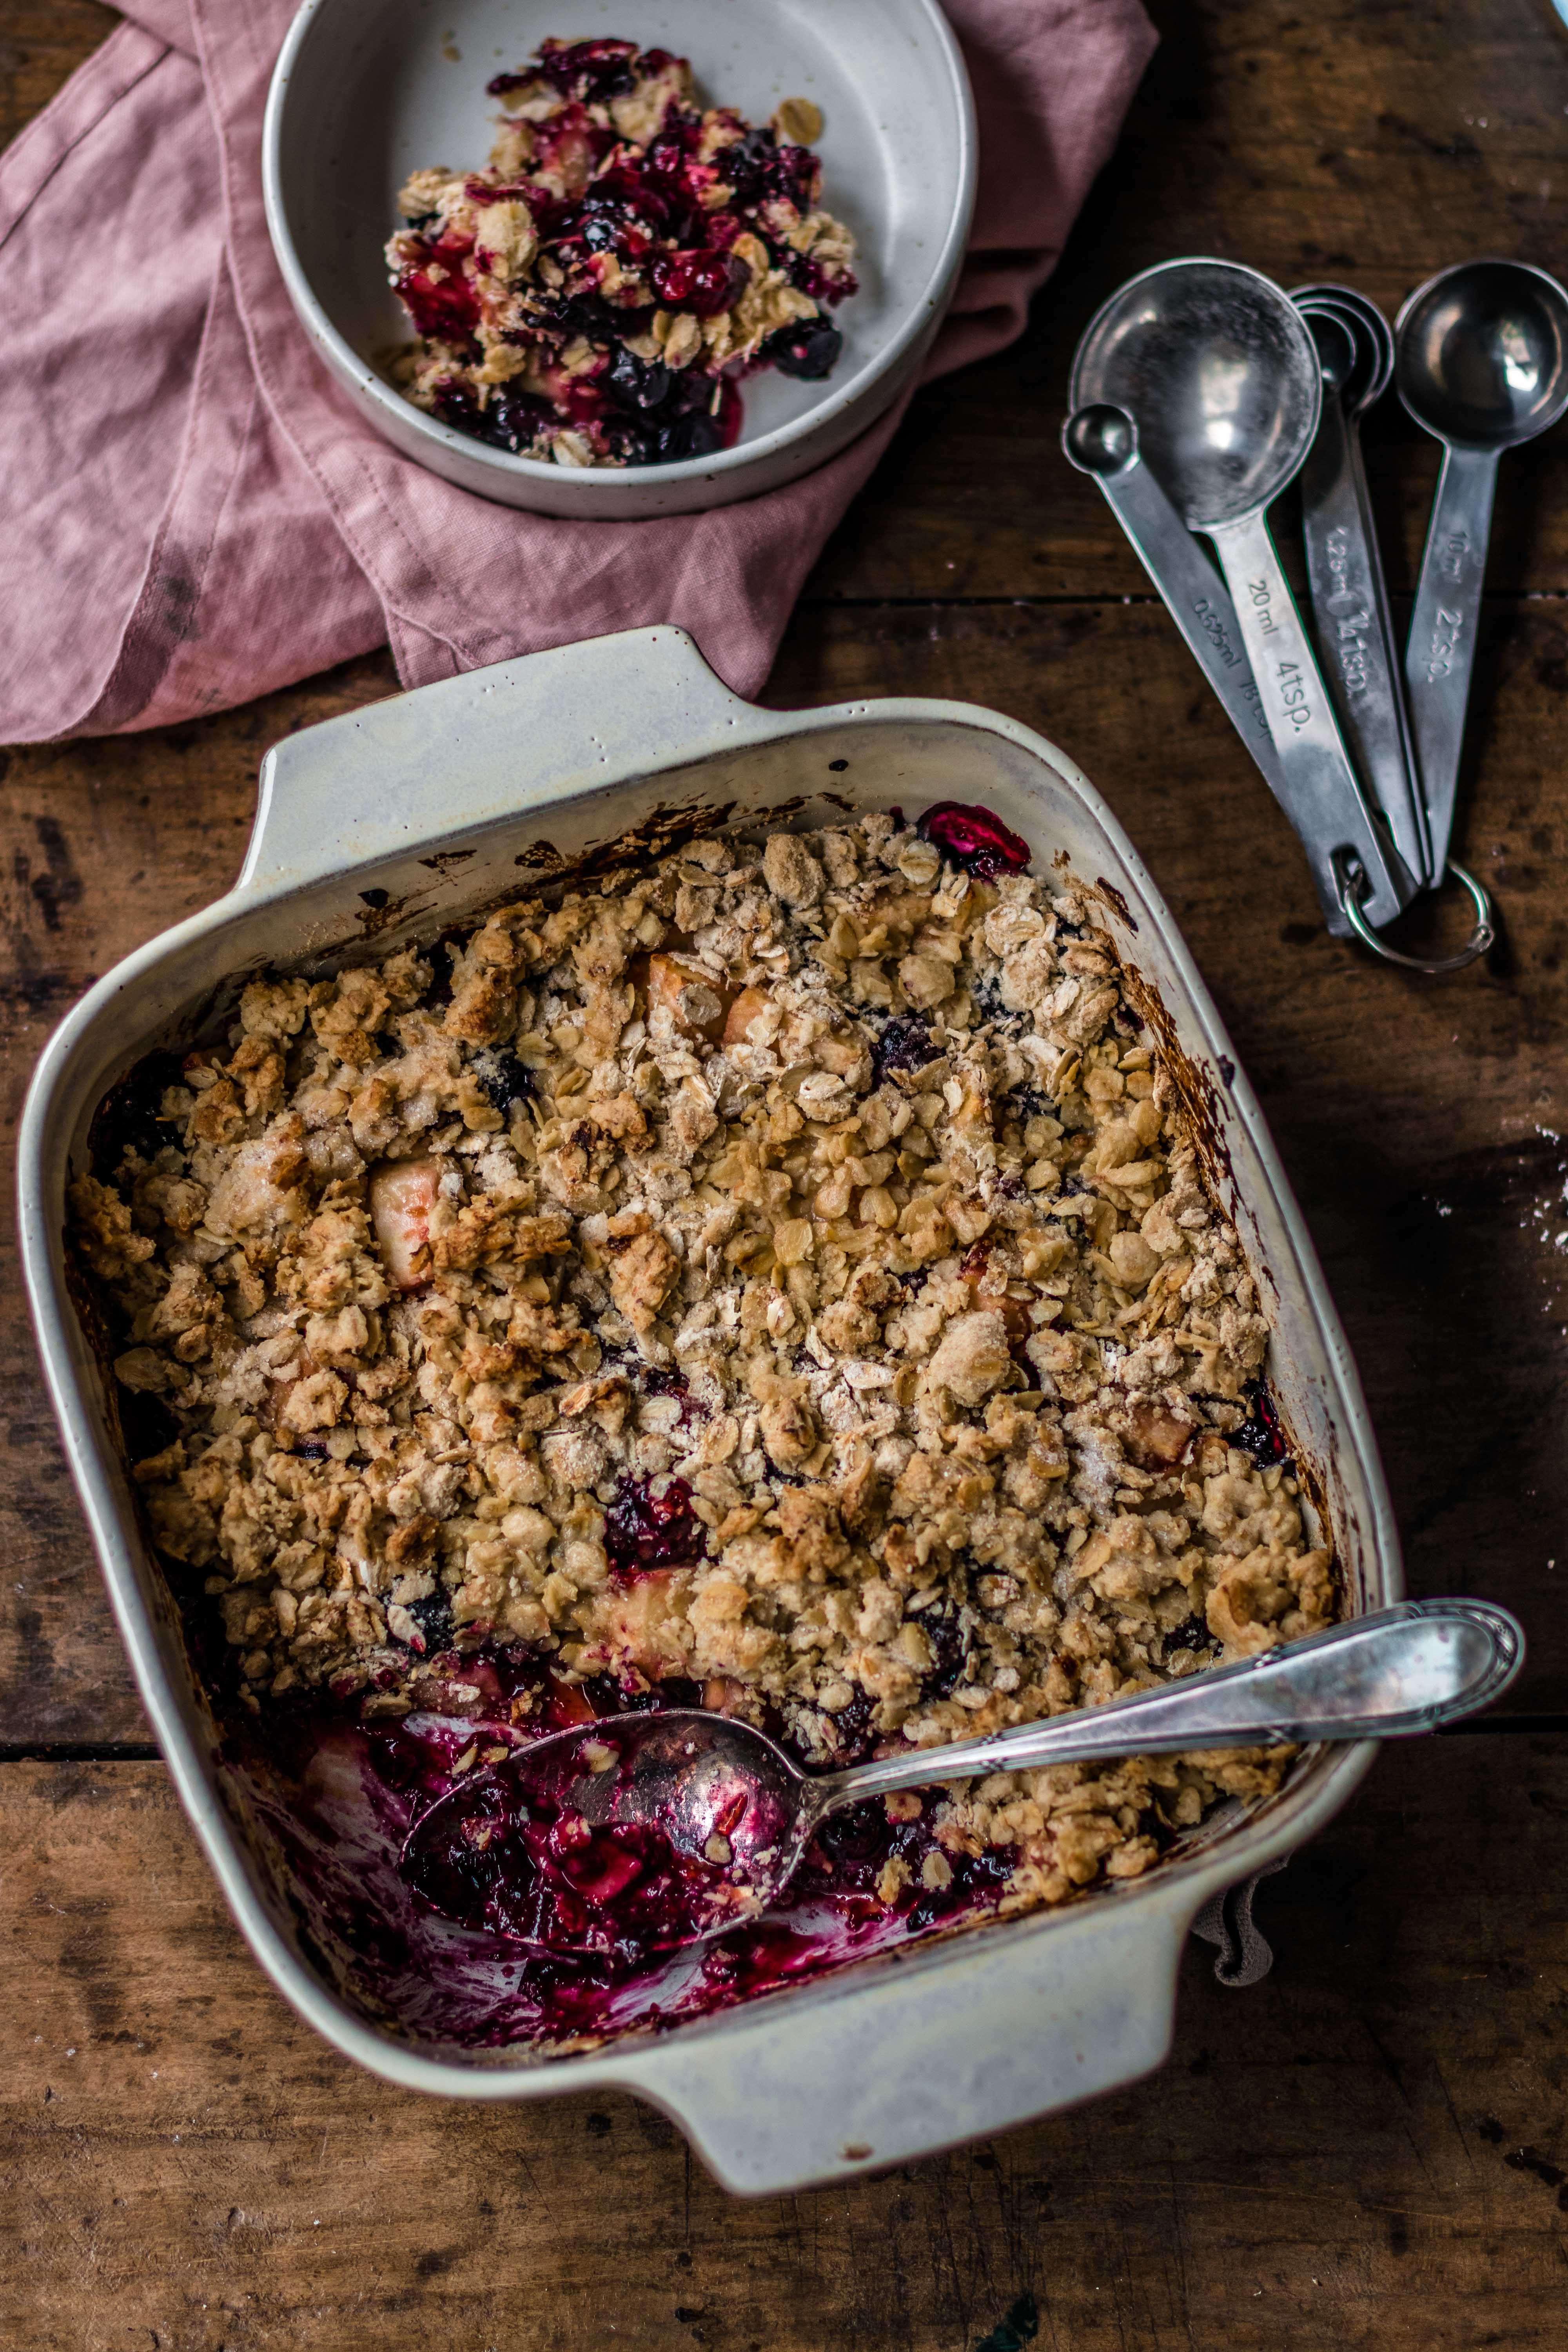 Apple & blueberry crumble